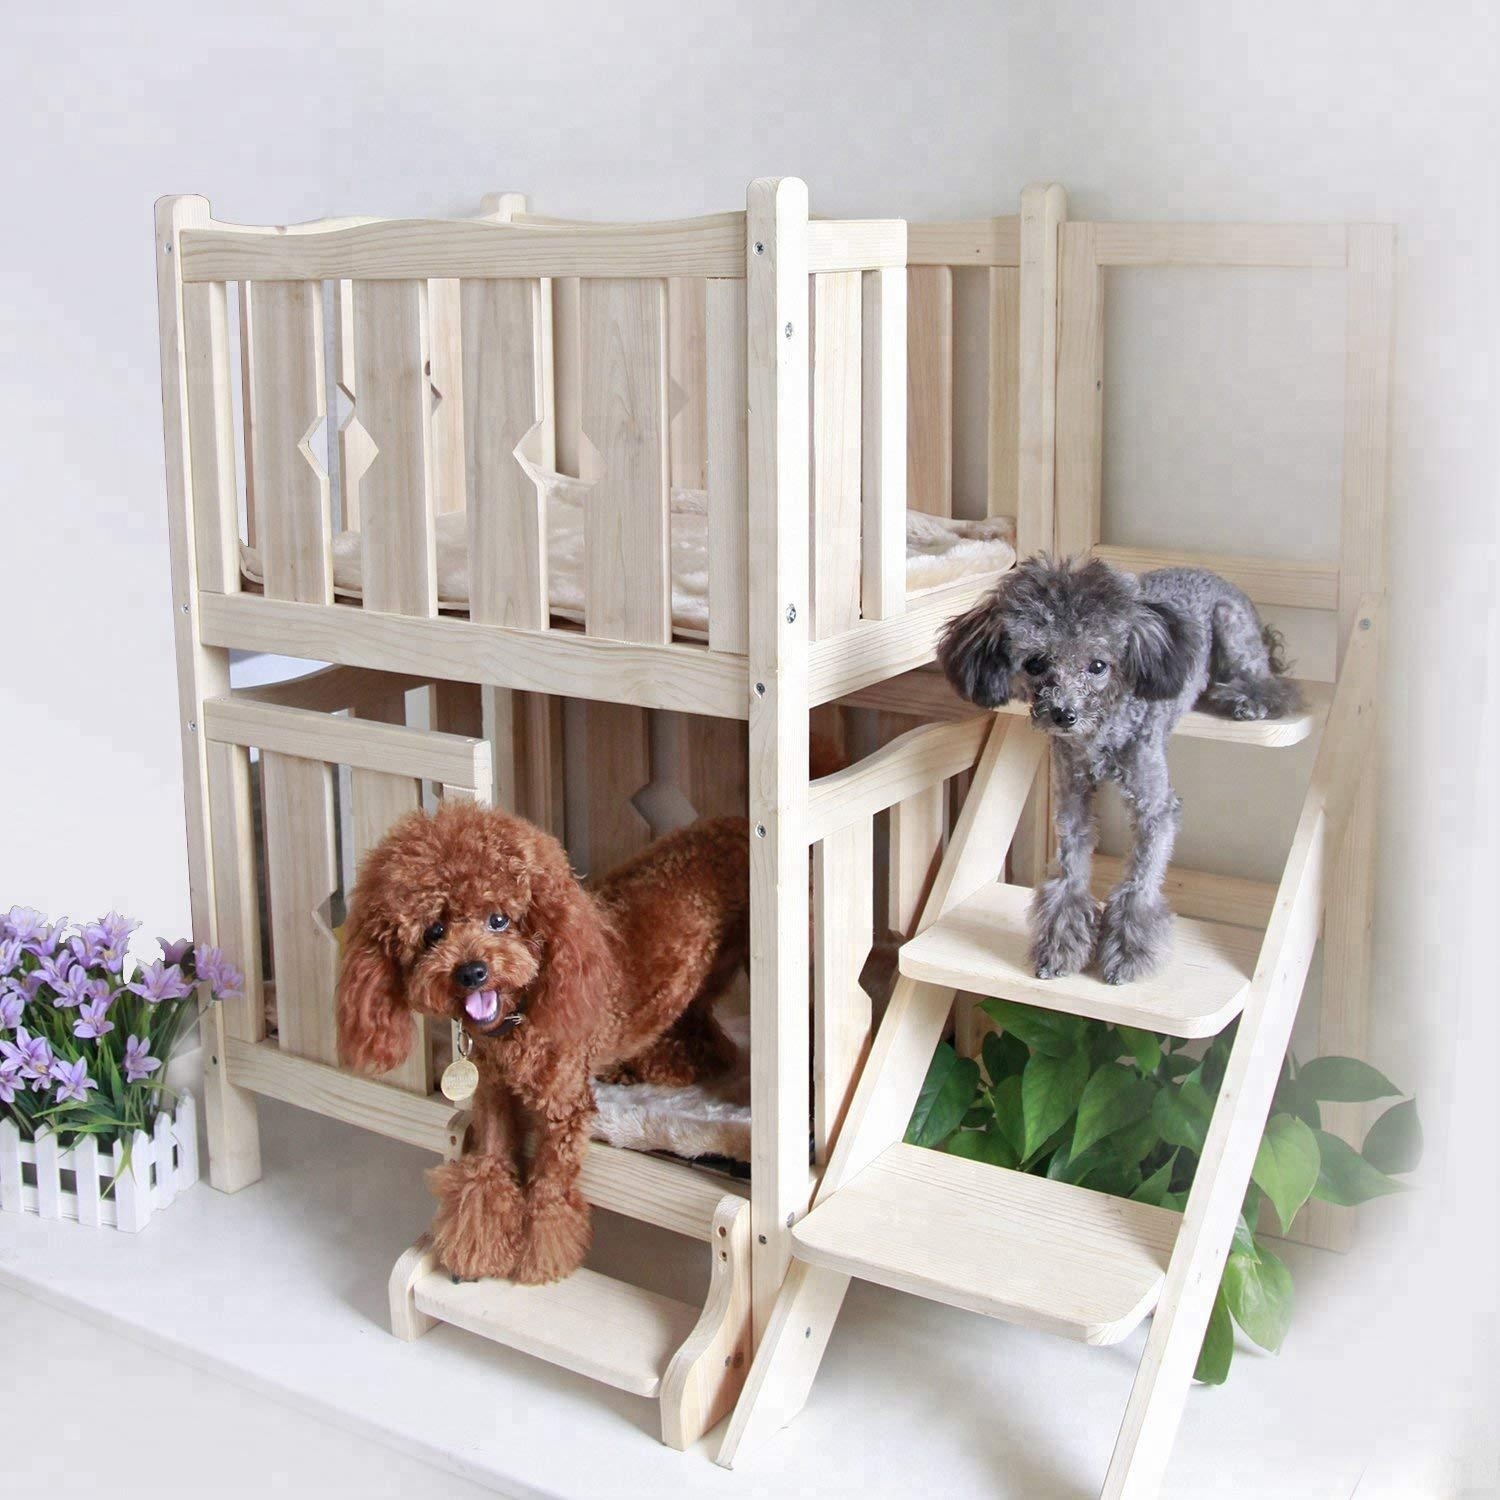 Ladder-bed-2 +80 Adorable Dog Bed Designs That Will Surprise You